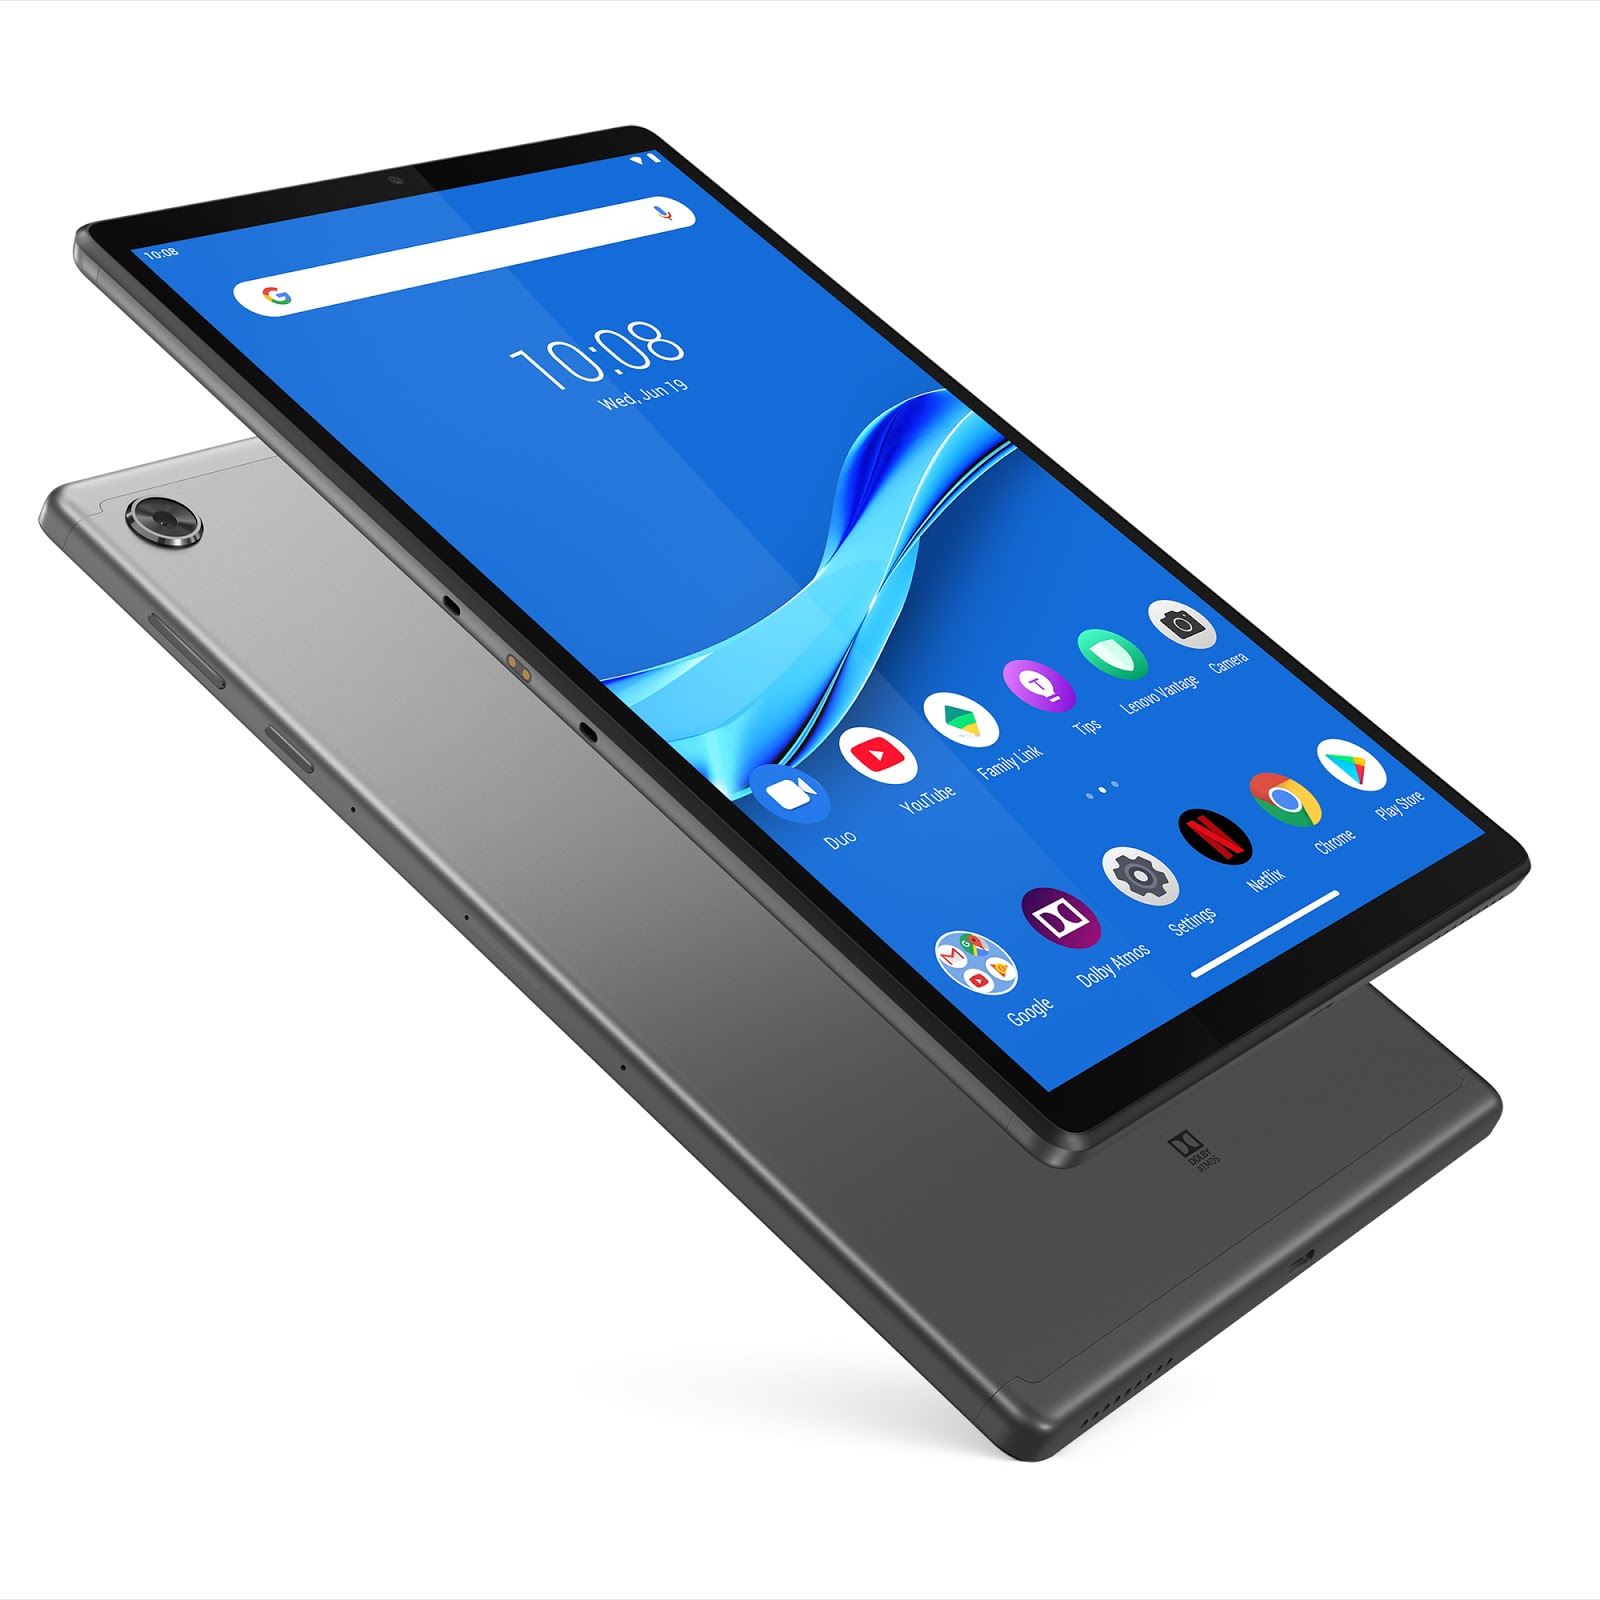 Lenovo Tab M10 FHD Plus 10.3" Tablet, 64GB Storage, 4GB Memory, 2.3GHz Octa-Core Processor, Android 9 Pie, FHD Display - image 1 of 4